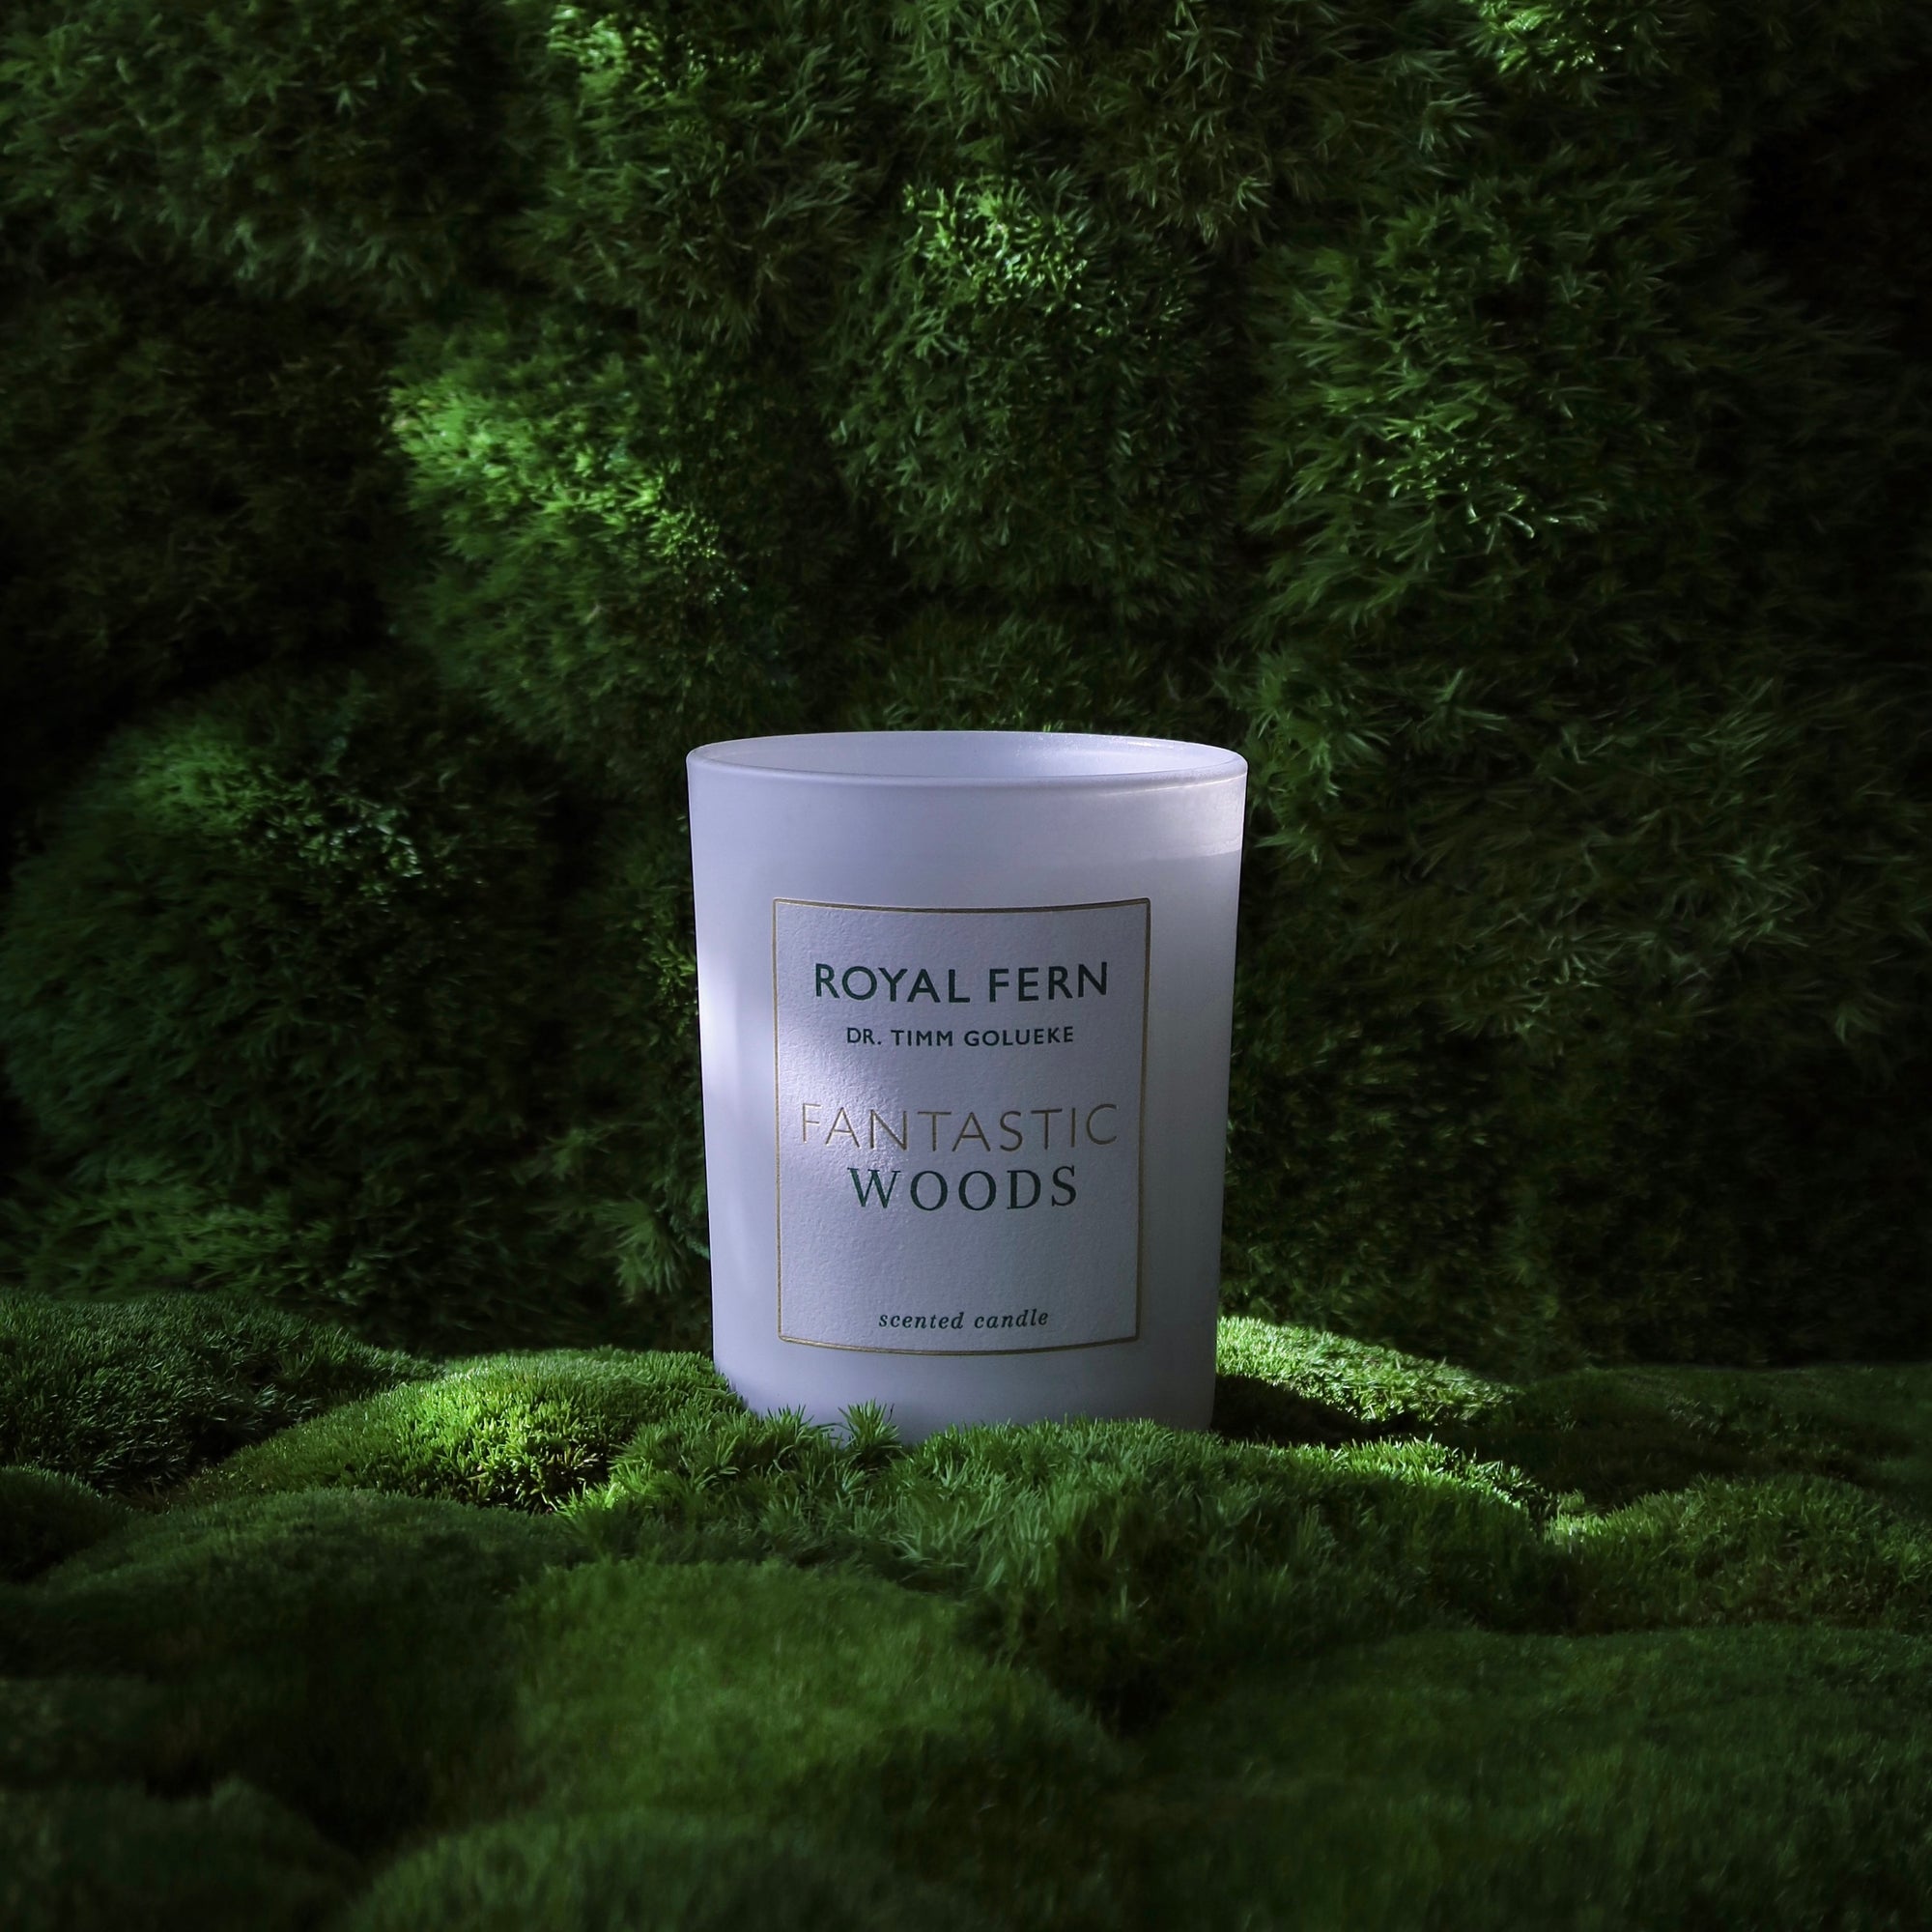 NEW IN: FANTASTIC WOODS